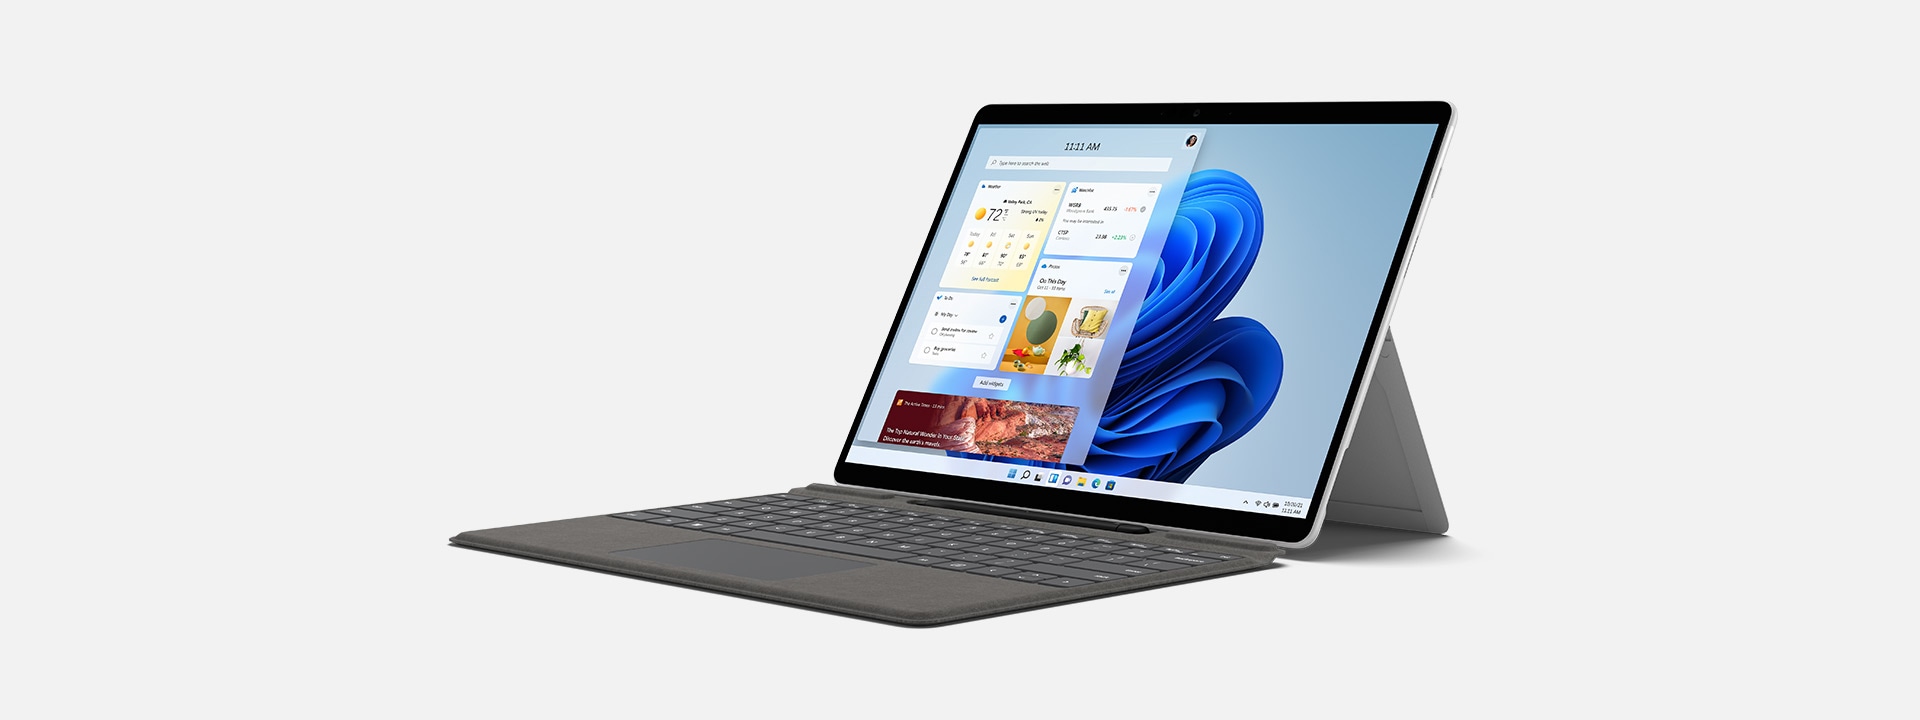 Surface Pro X shown as a laptop with Windows 11 home screen.